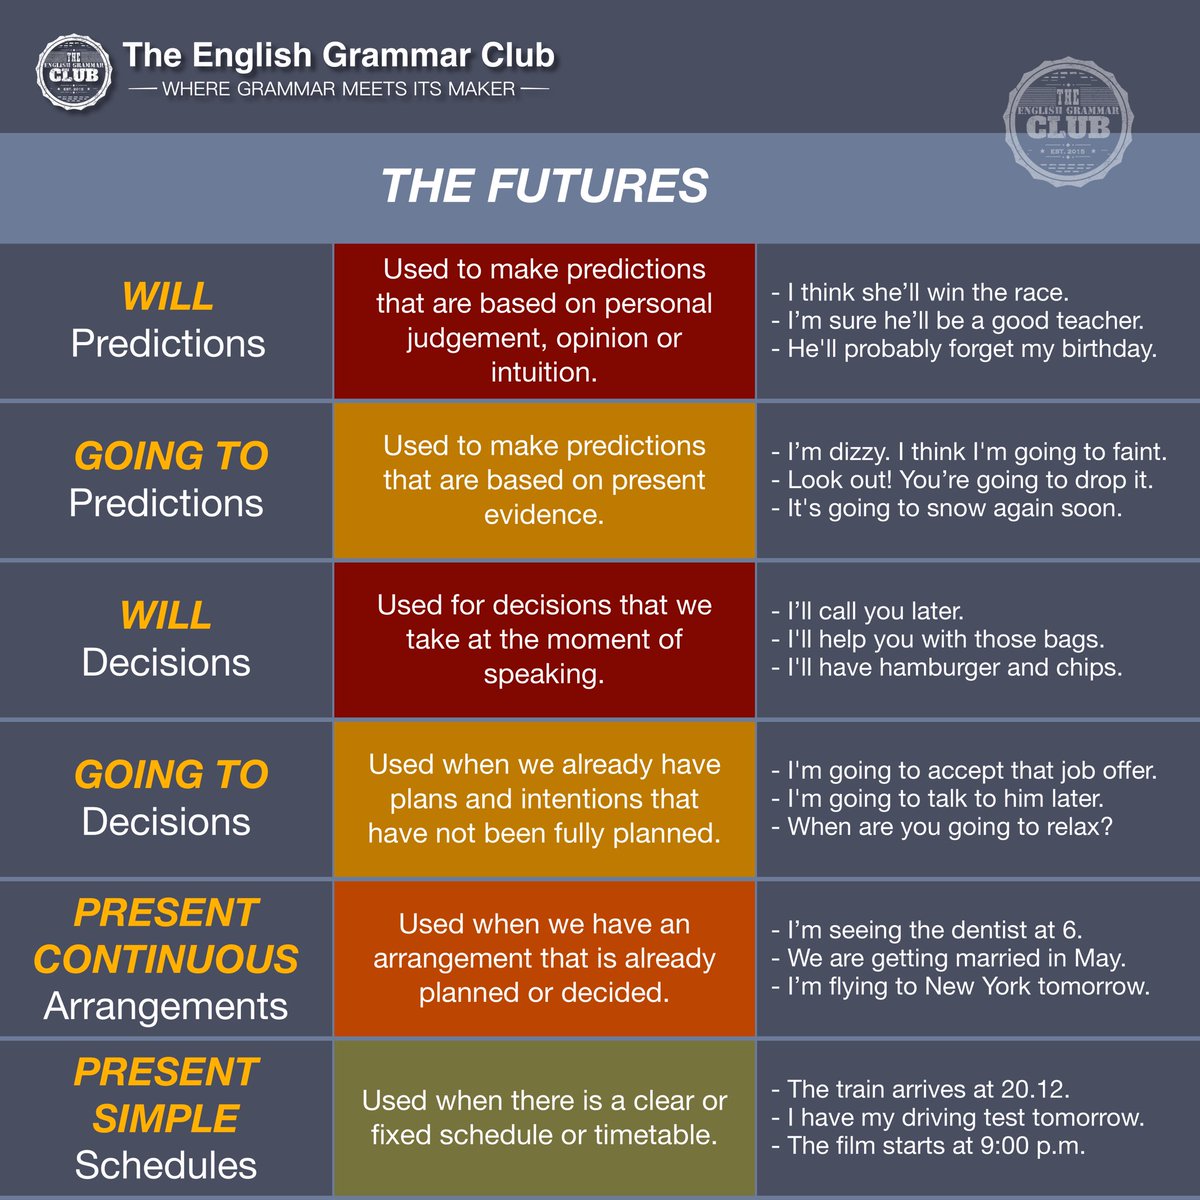 Now I know my futures in #English